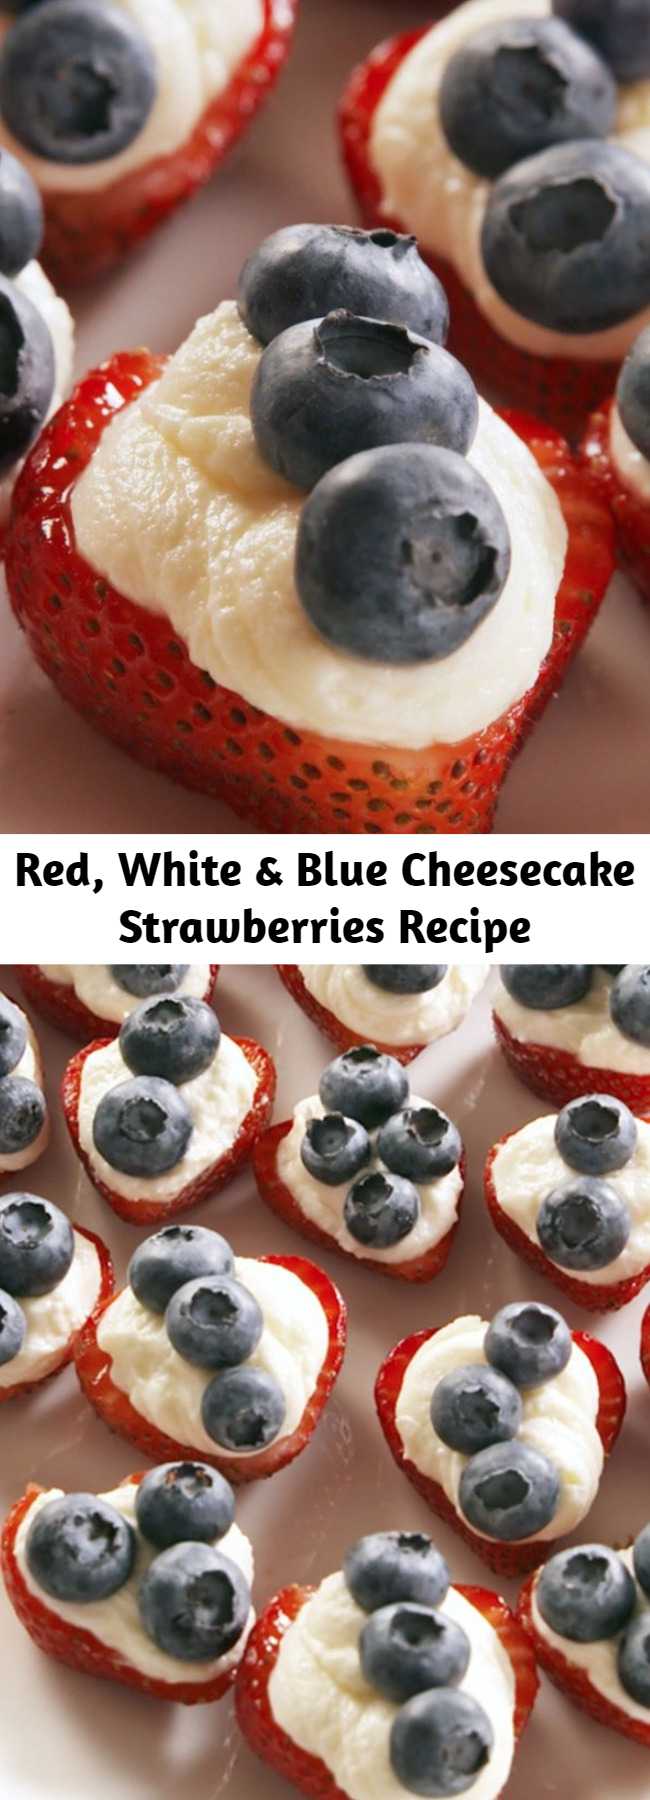 Red, White & Blue Cheesecake Strawberries Recipe - When you're looking for an easy July 4th dessert, look no further than these adorable — and, ugh, so addictive — red, white, and blue strawberries. The slightly sweet cheesecake filling is the perfect complement to the berries. They might be better than watching the fireworks.